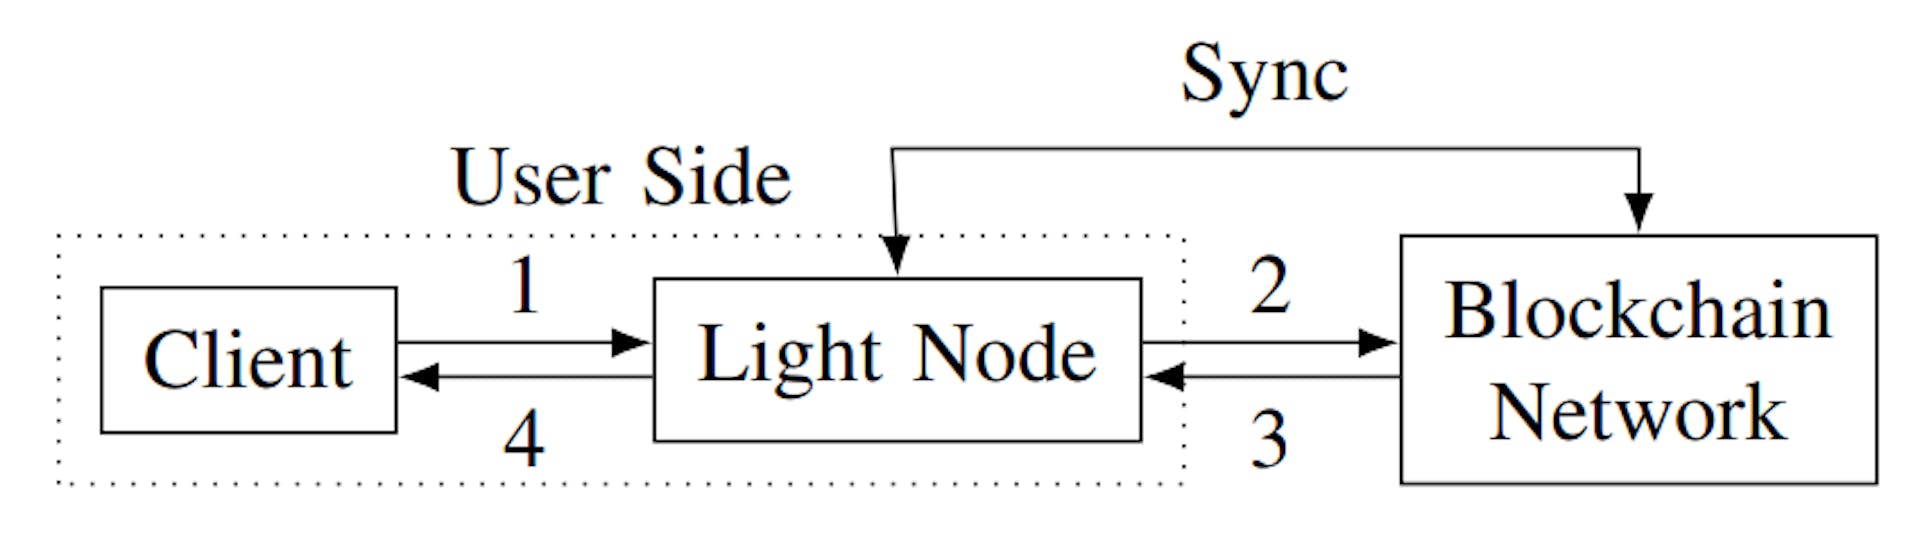 Fig. 4. Example of a user interacting with a light node with RPC. (1) The client sends an RPC query to the node. (2) The node asks the blockchain network for the necessary blocks to process the query. (3) The blockchain network delivers the blocks to the node. (4) The node verifies the blocks with the stored headers, processes the data, and sends the result back to the client.